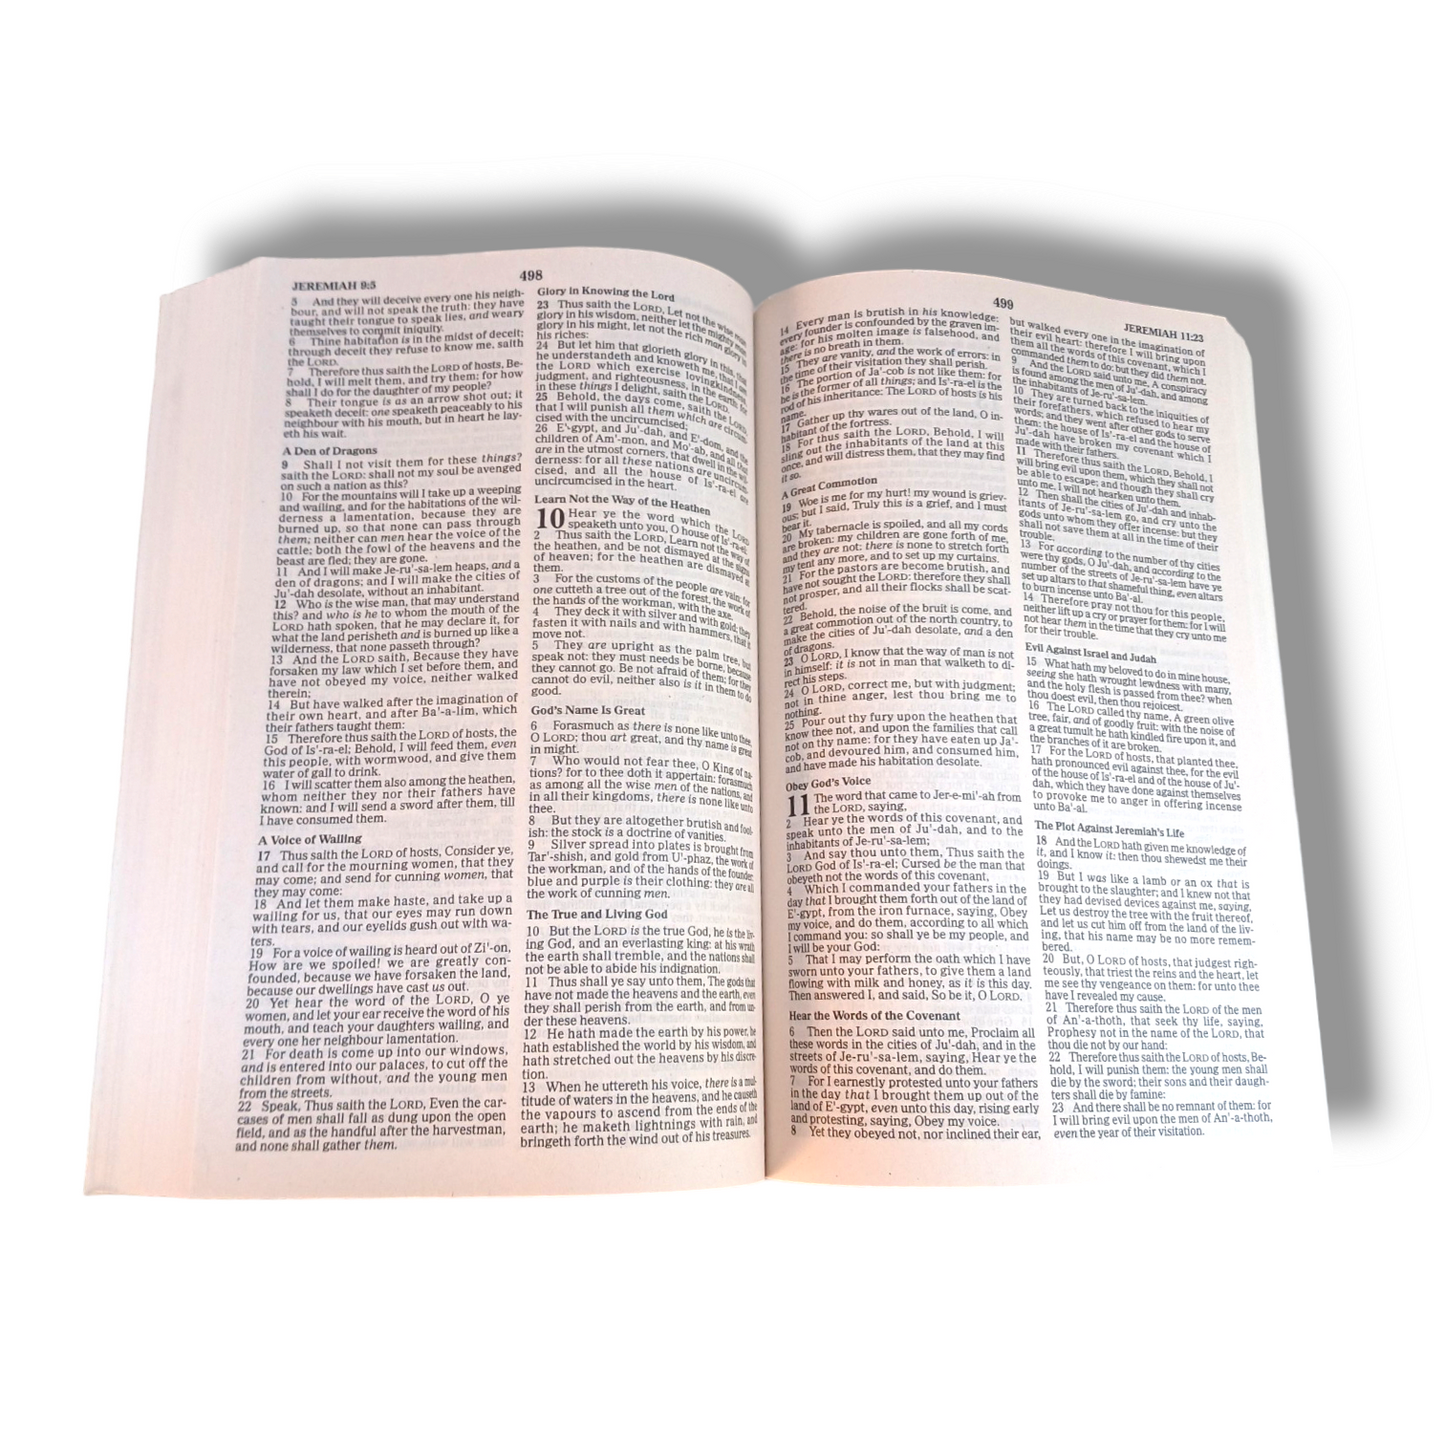 KJV Value Outreach Bible | Paper Bound Edition |  Holy Bible King James Version | New Edition